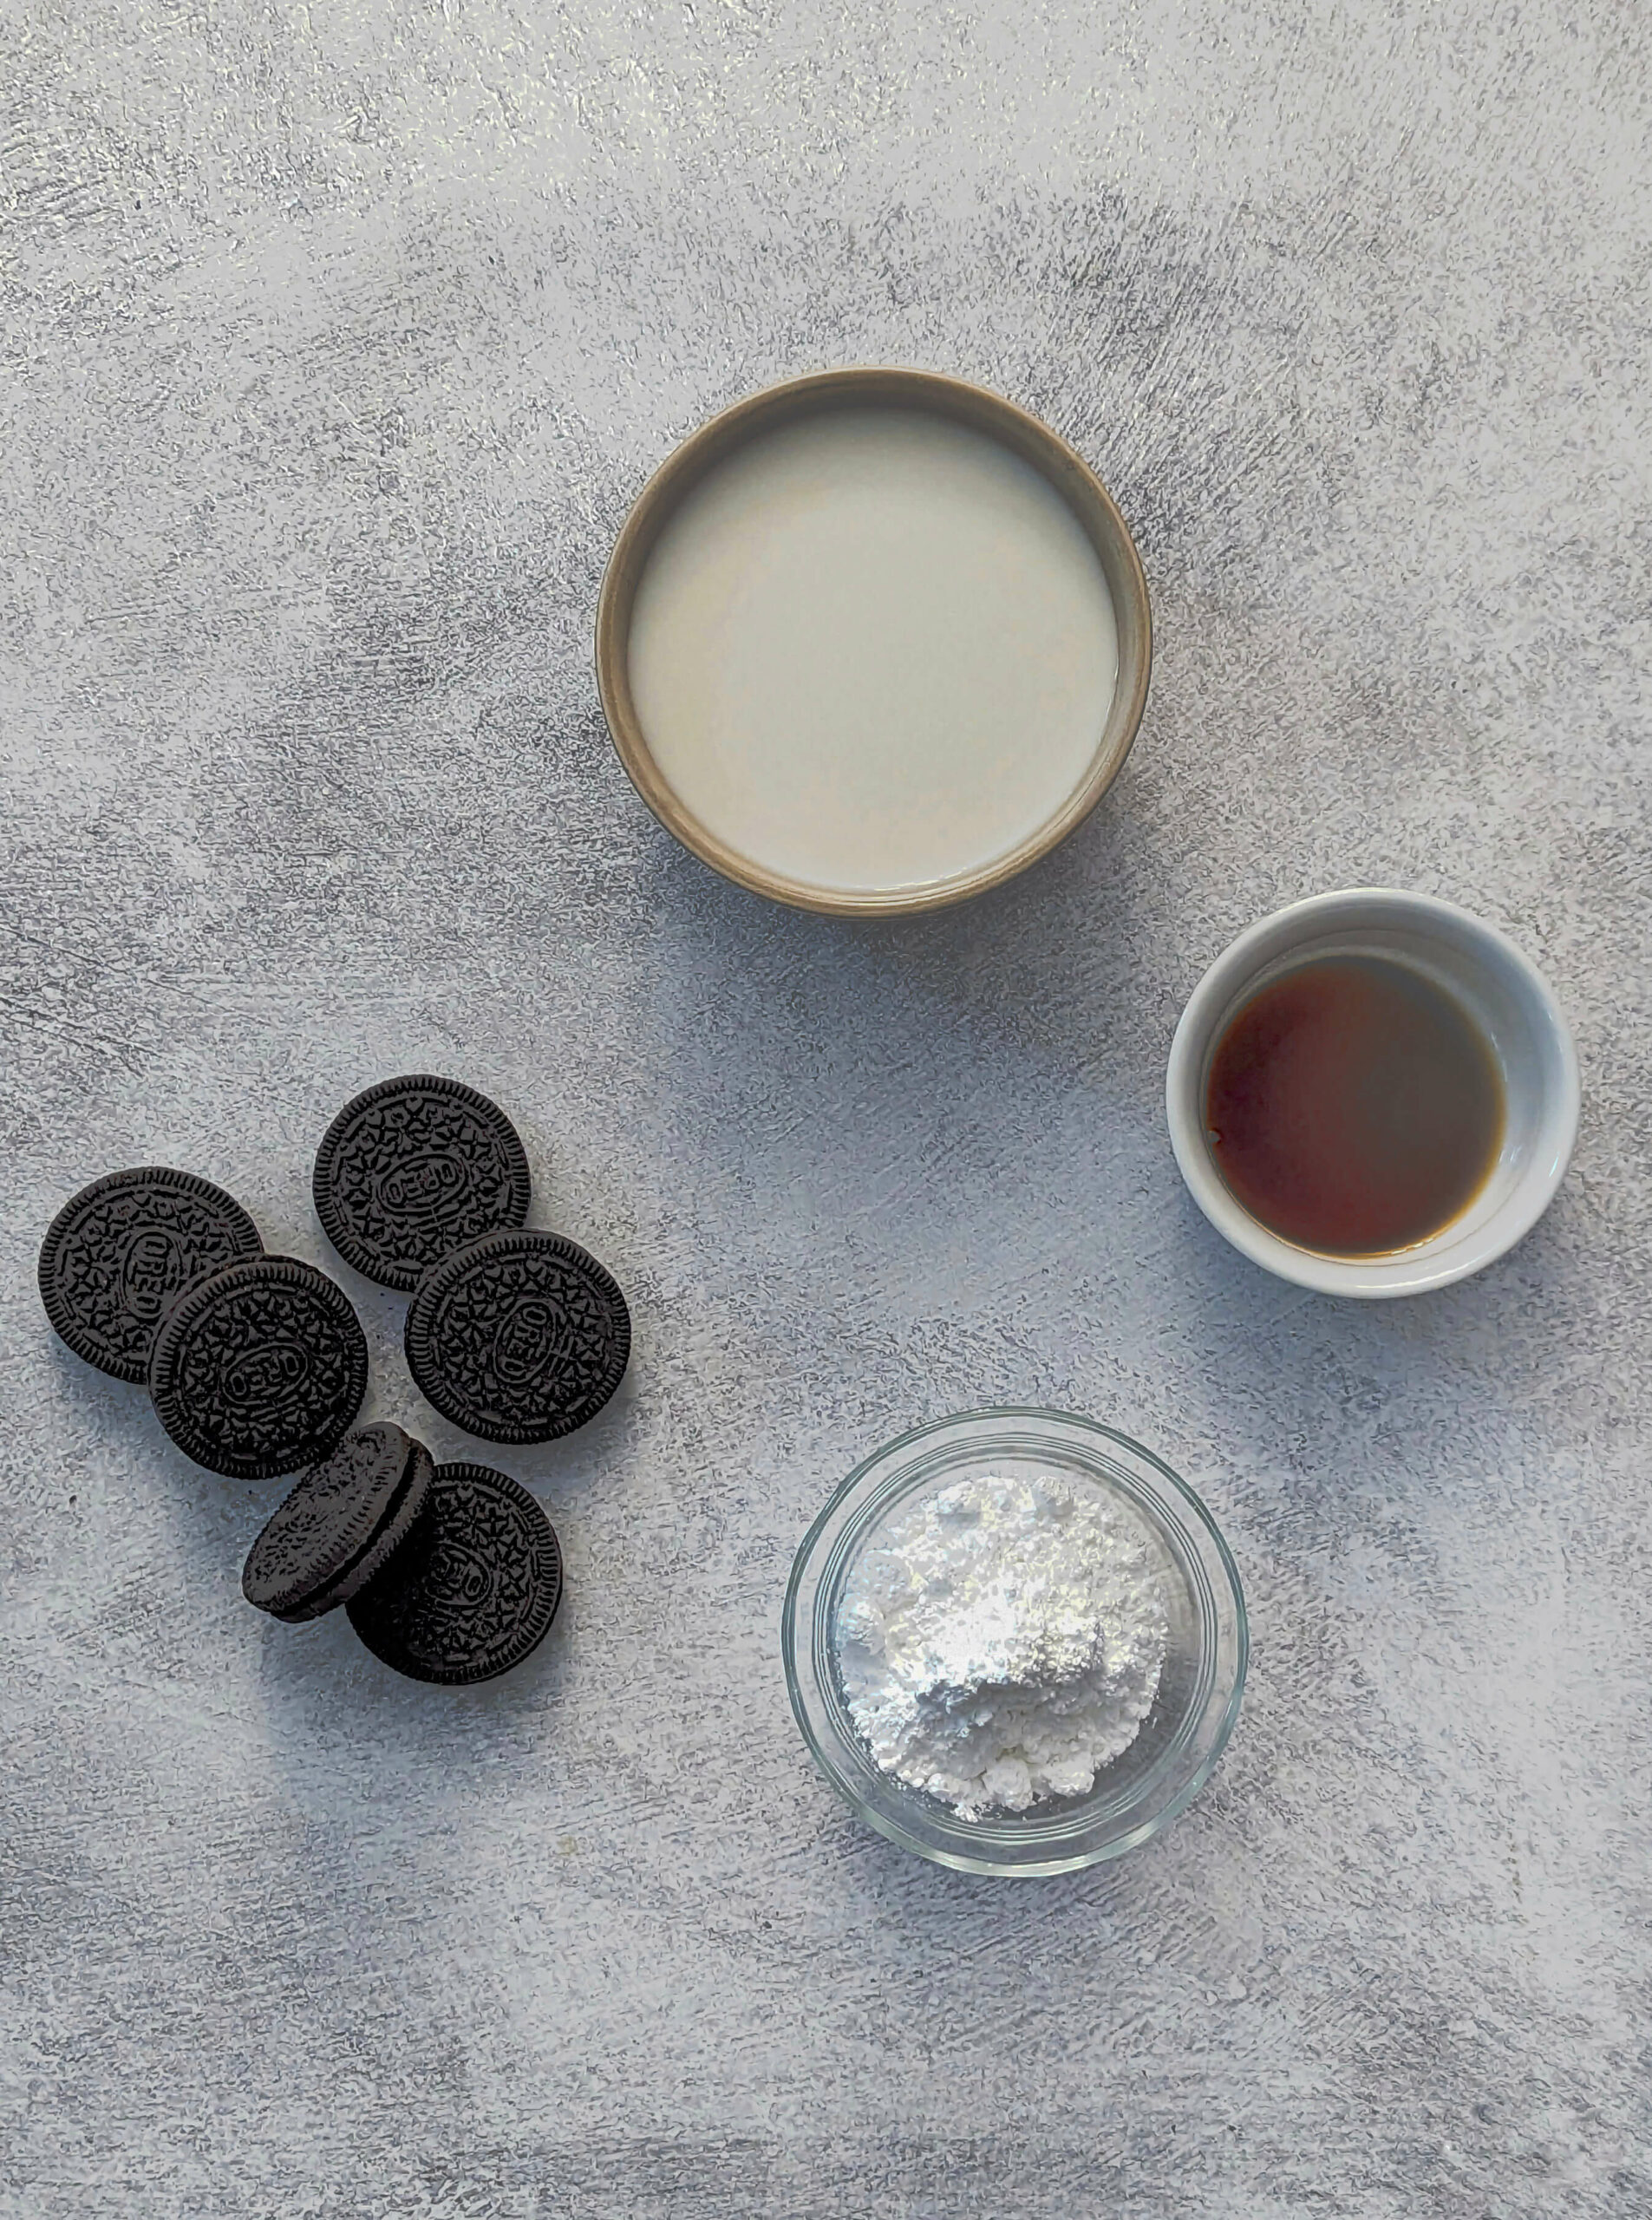 An image showing all of the ingredients for Oreo Milkshake without Ice Cream.